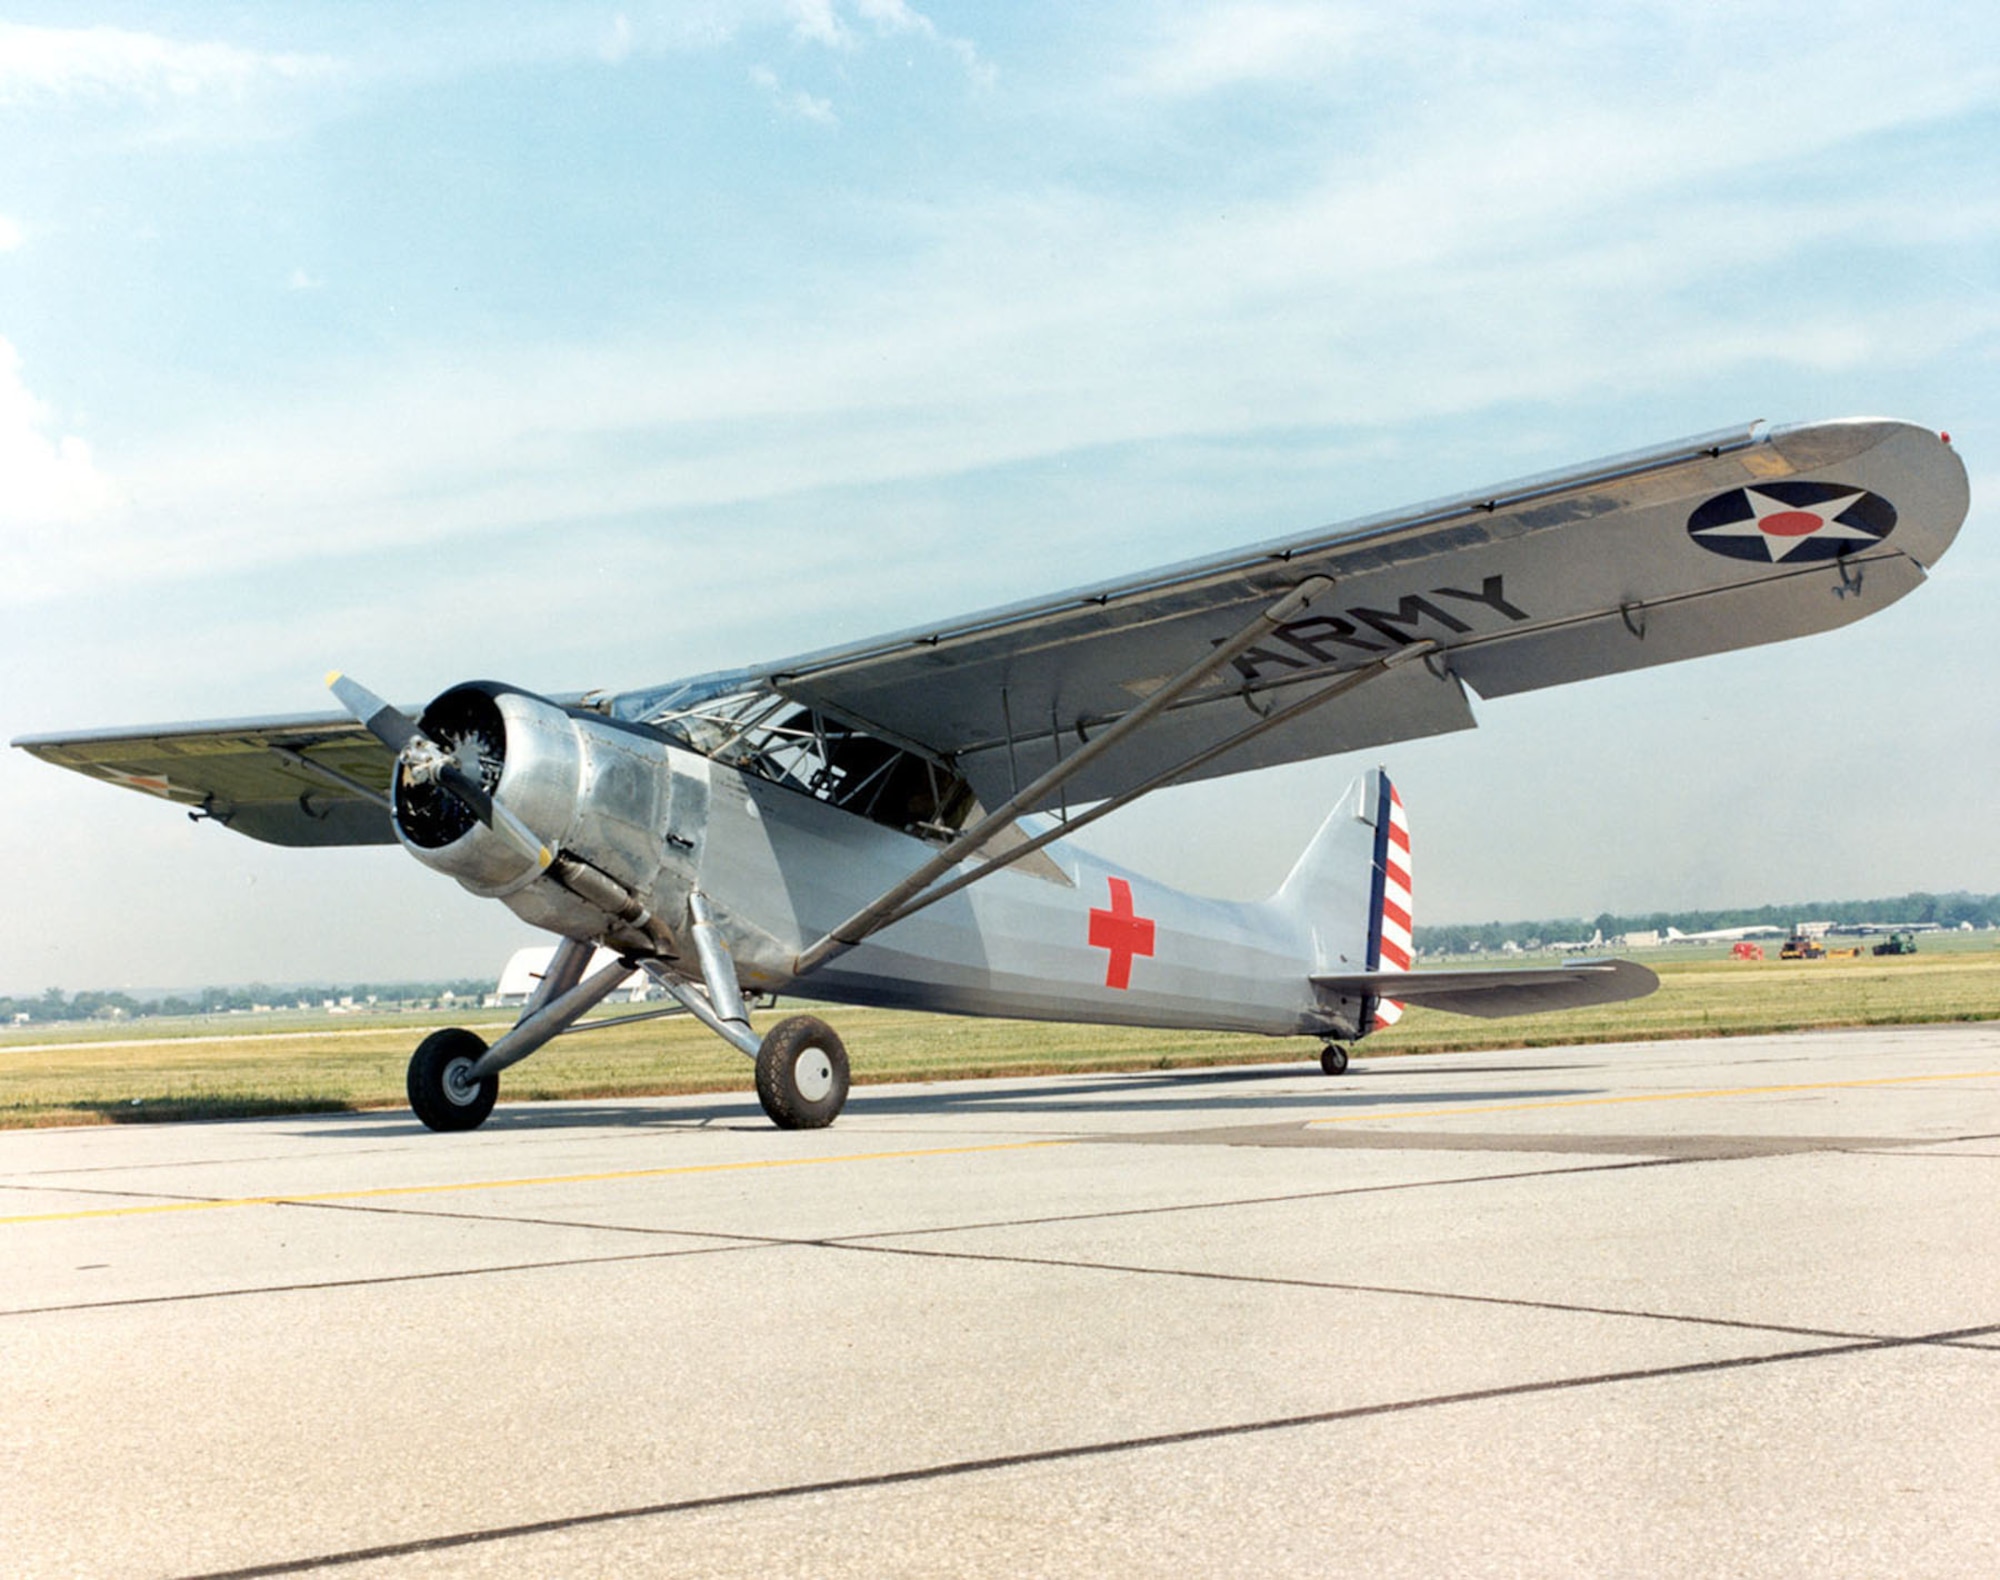 DAYTON, Ohio -- Vultee L-1A Vigilant at the National Museum of the United States Air Force. (U.S. Air Force photo)